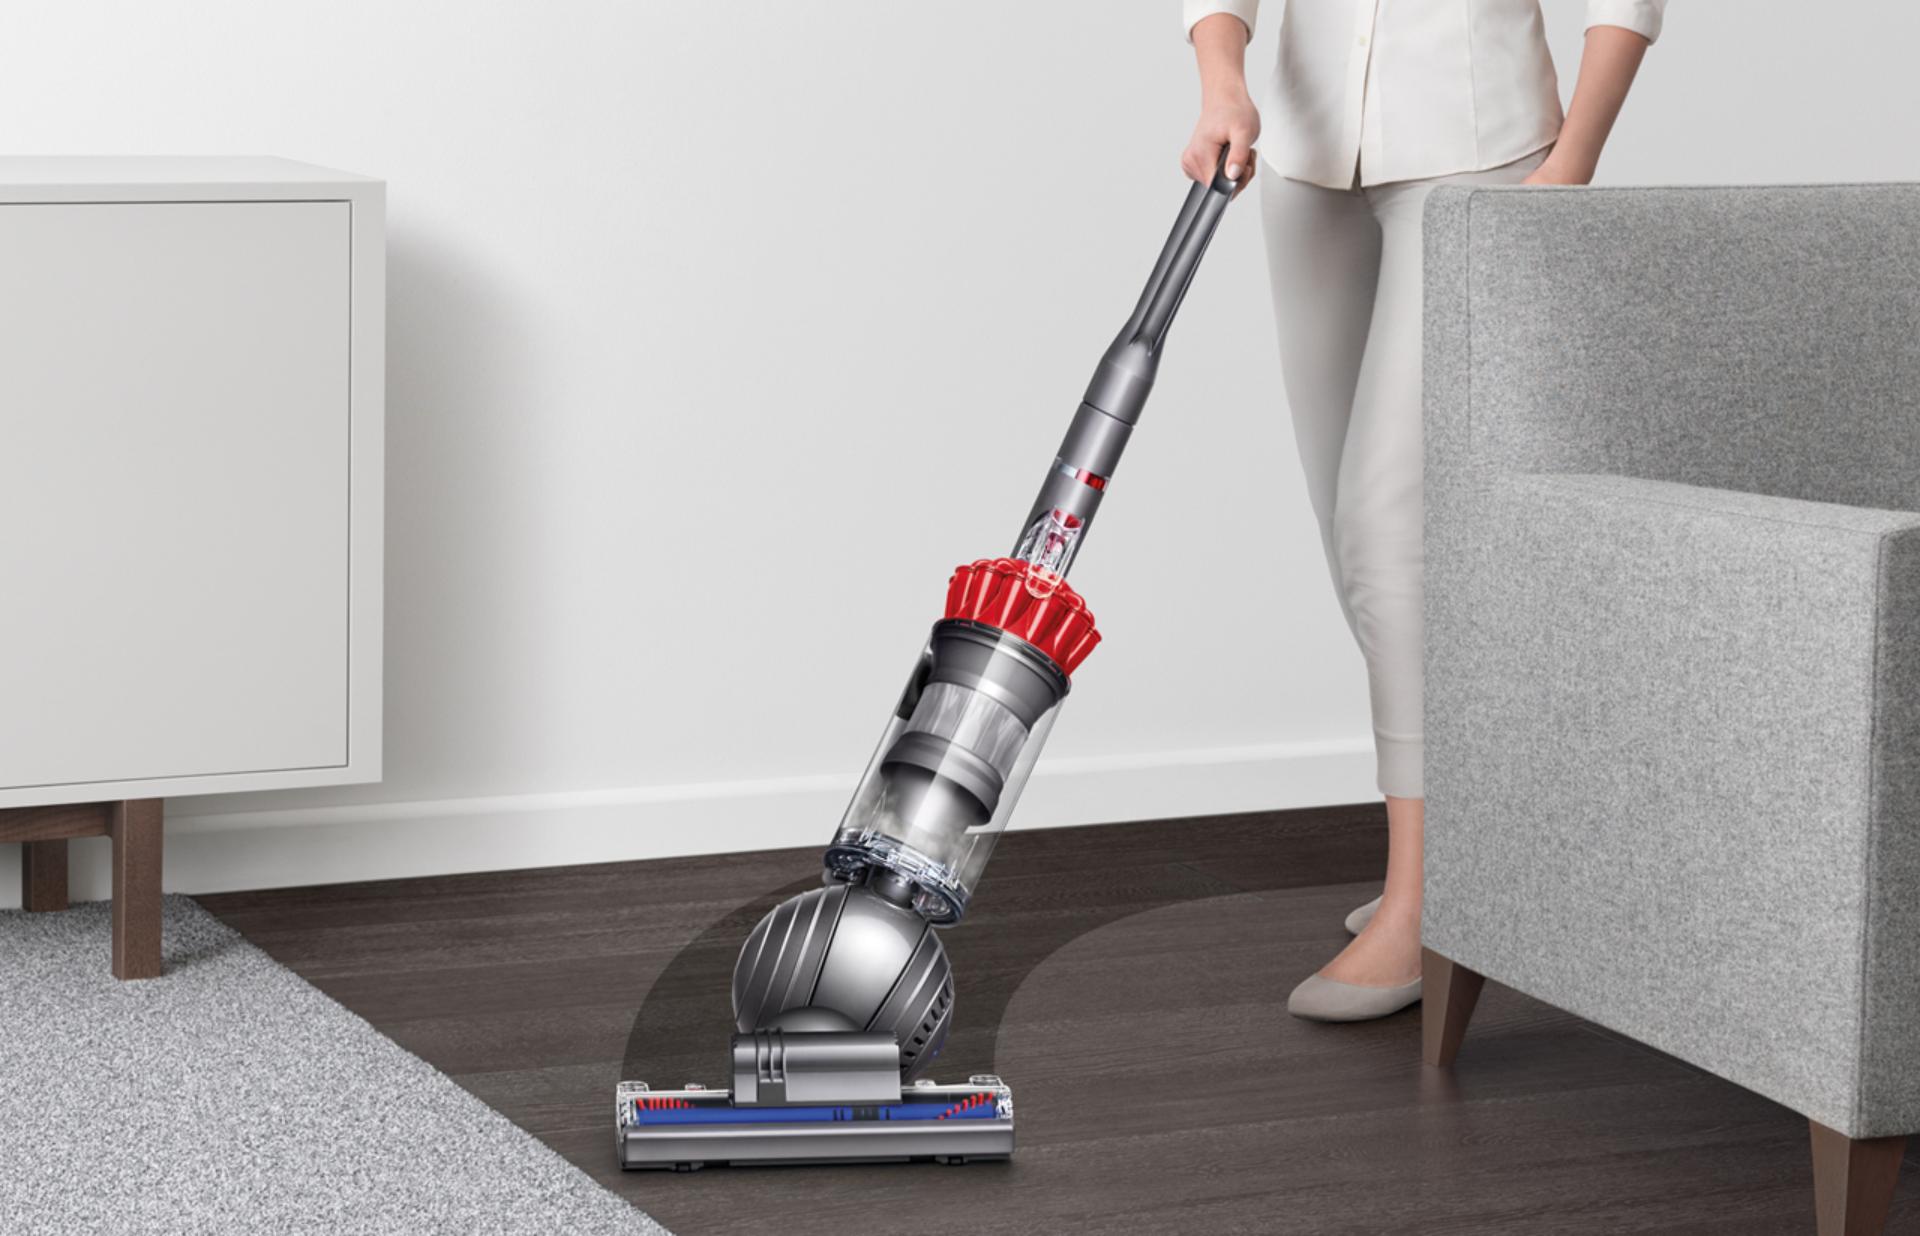 A man vacuuming floor using the Dyson upright vacuum cleaner